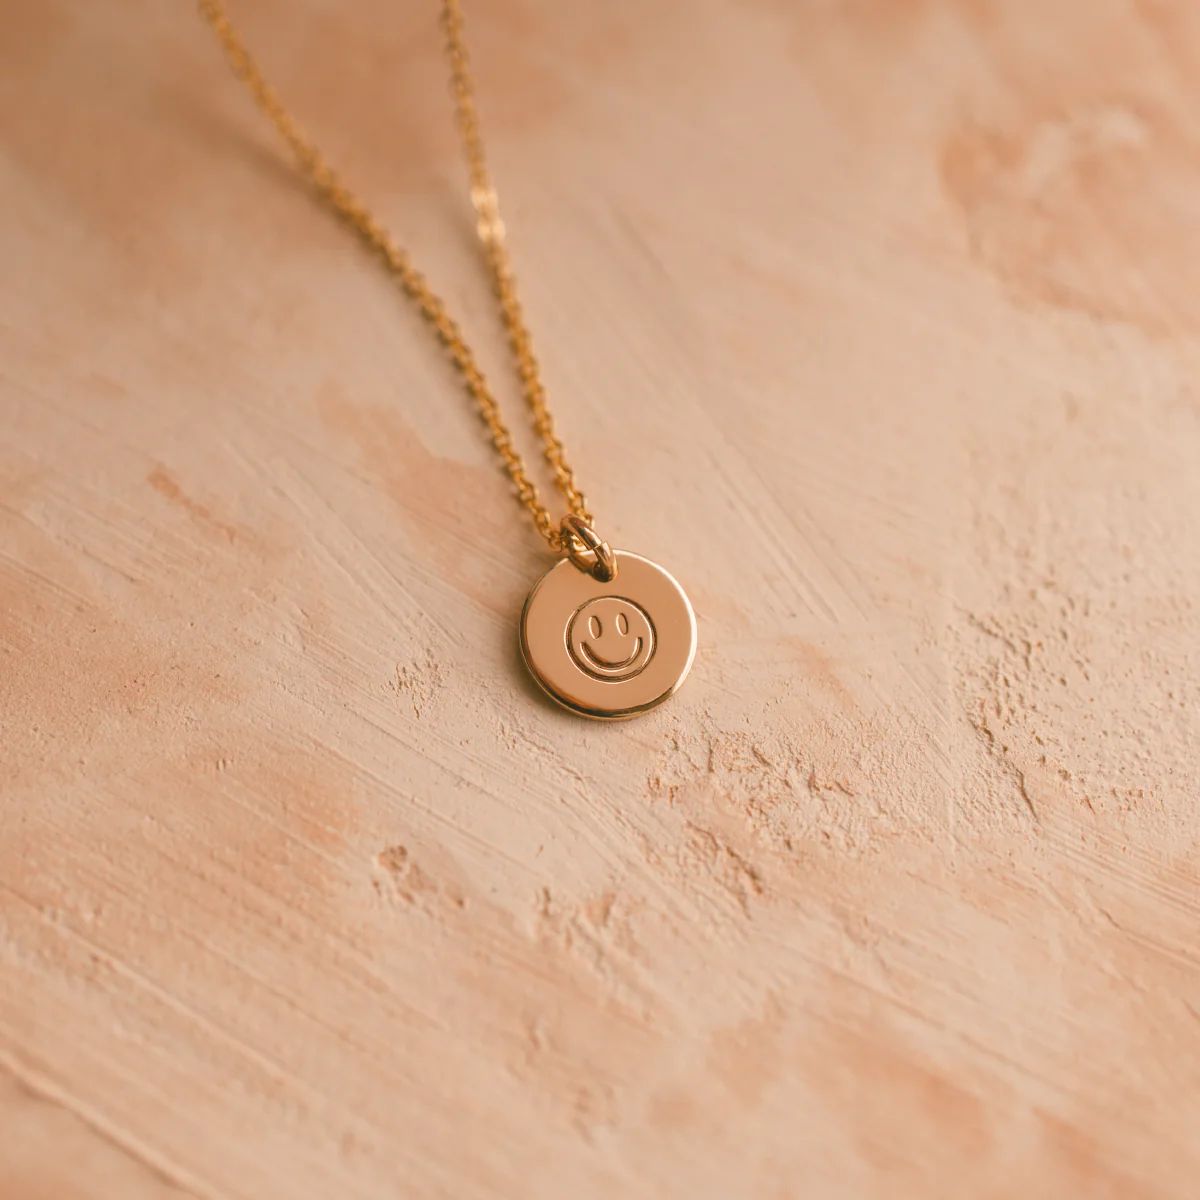 Smiley Disc Necklace | Made by Mary (US)